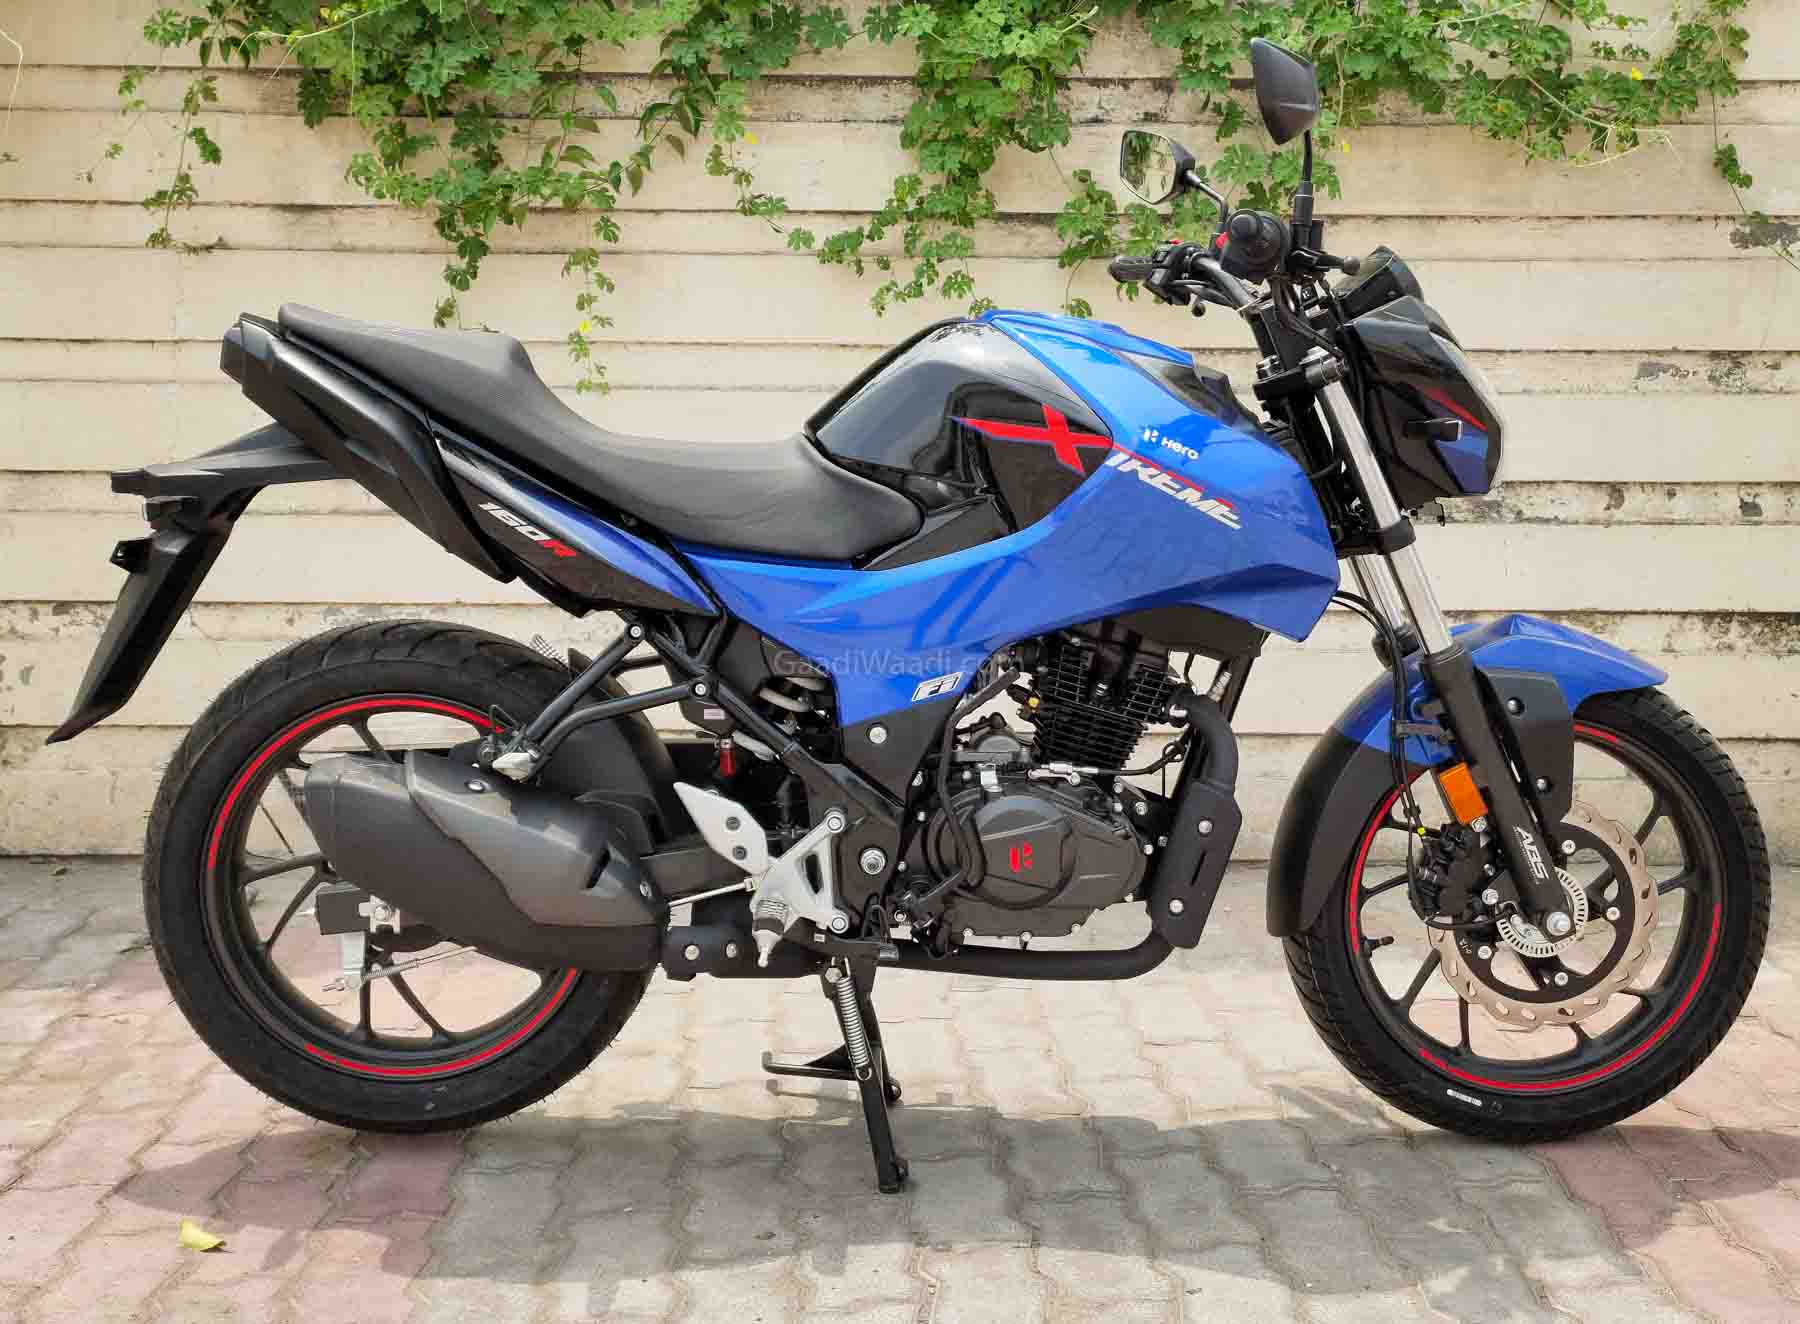 Hero Xtreme 160r Posts 12 000 Unit Sales In August